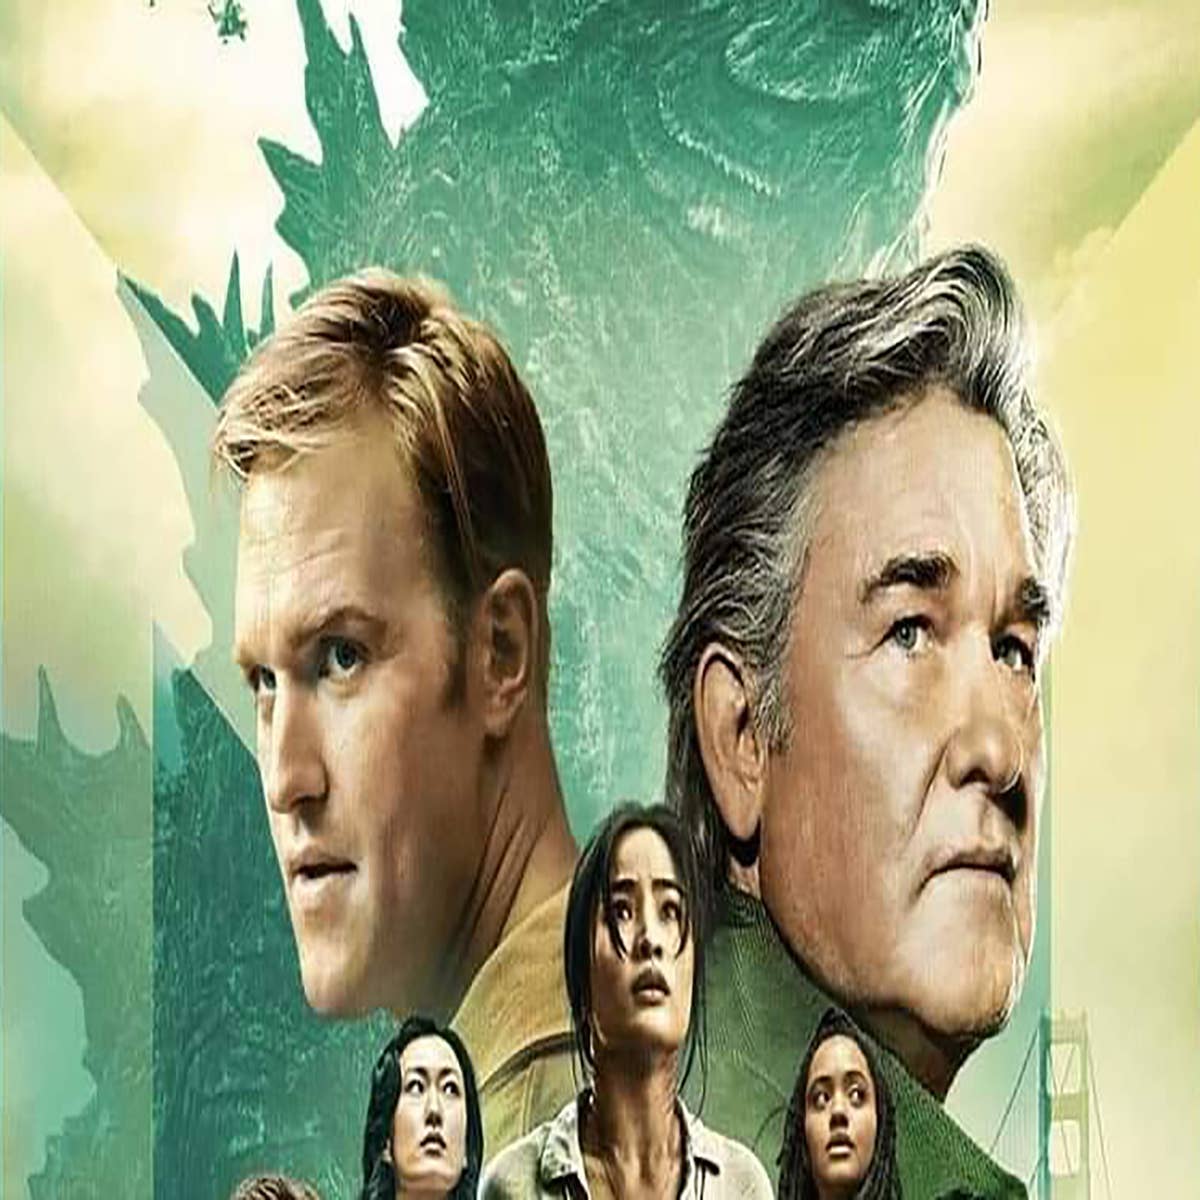 Godzilla Director Discusses Casting Kurt Russell & Son In The Same